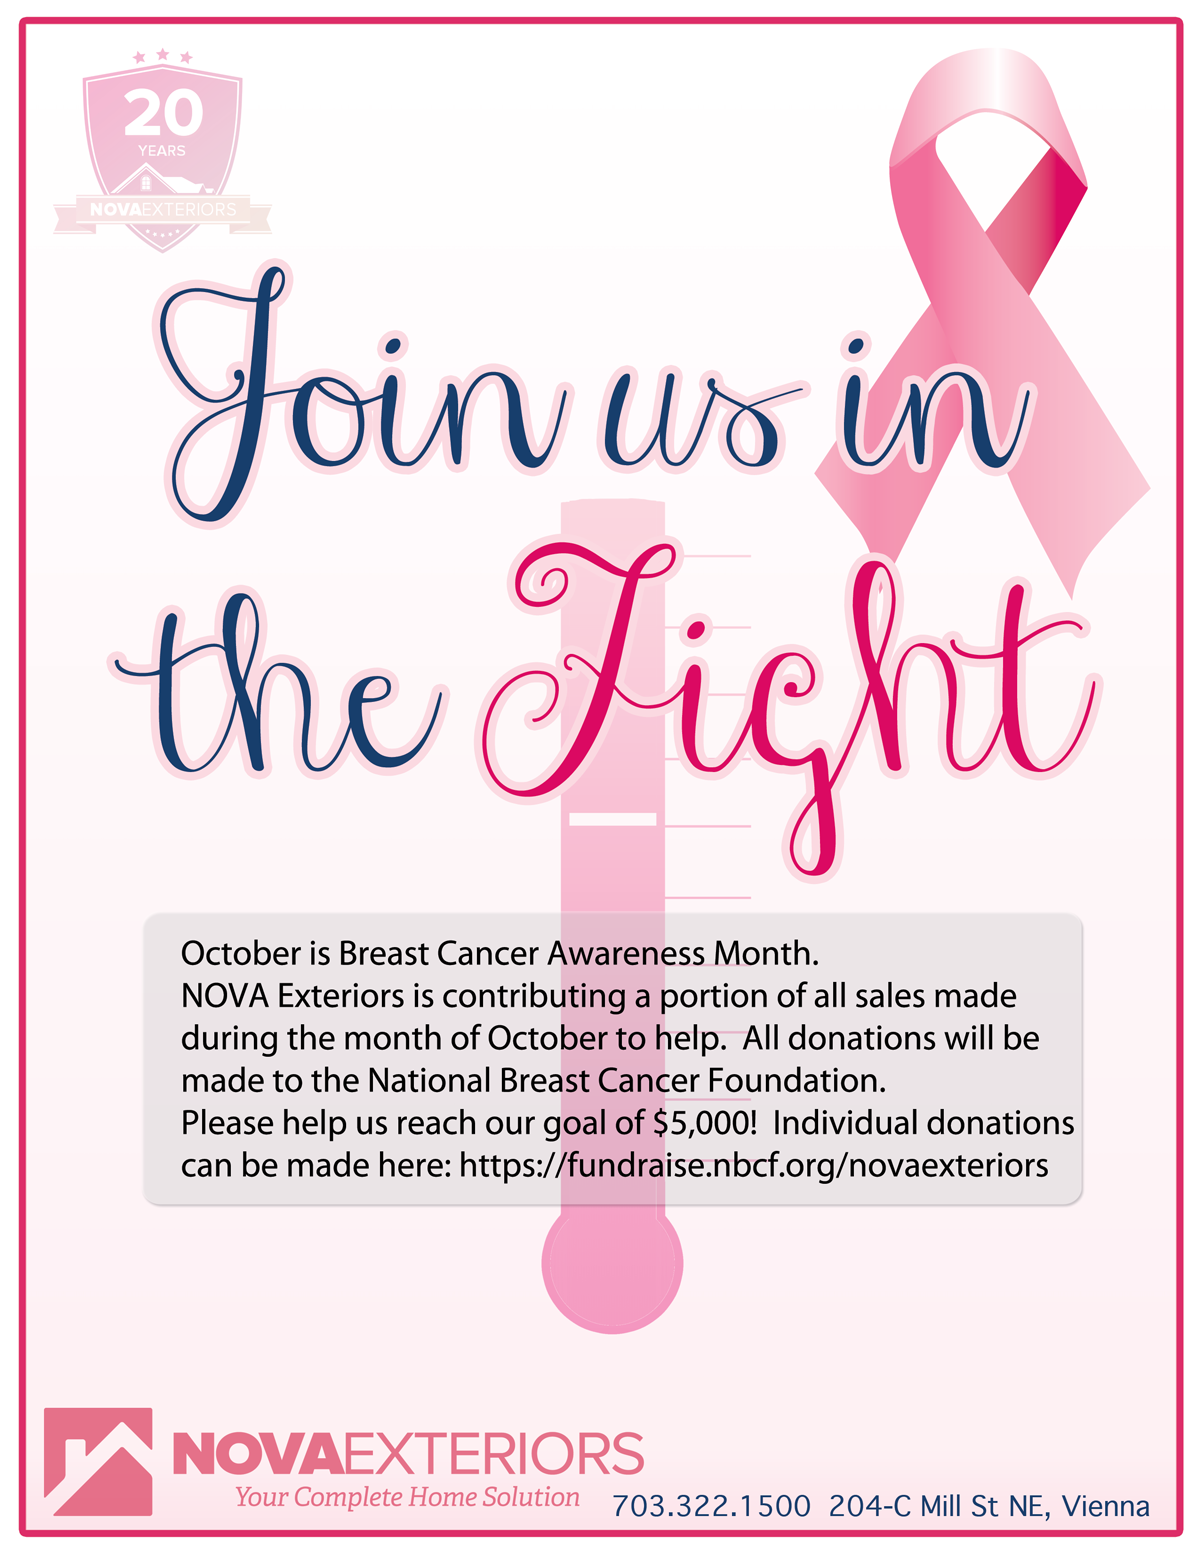 Join NOVA Exteriors in the Fight to End Breast Cancer